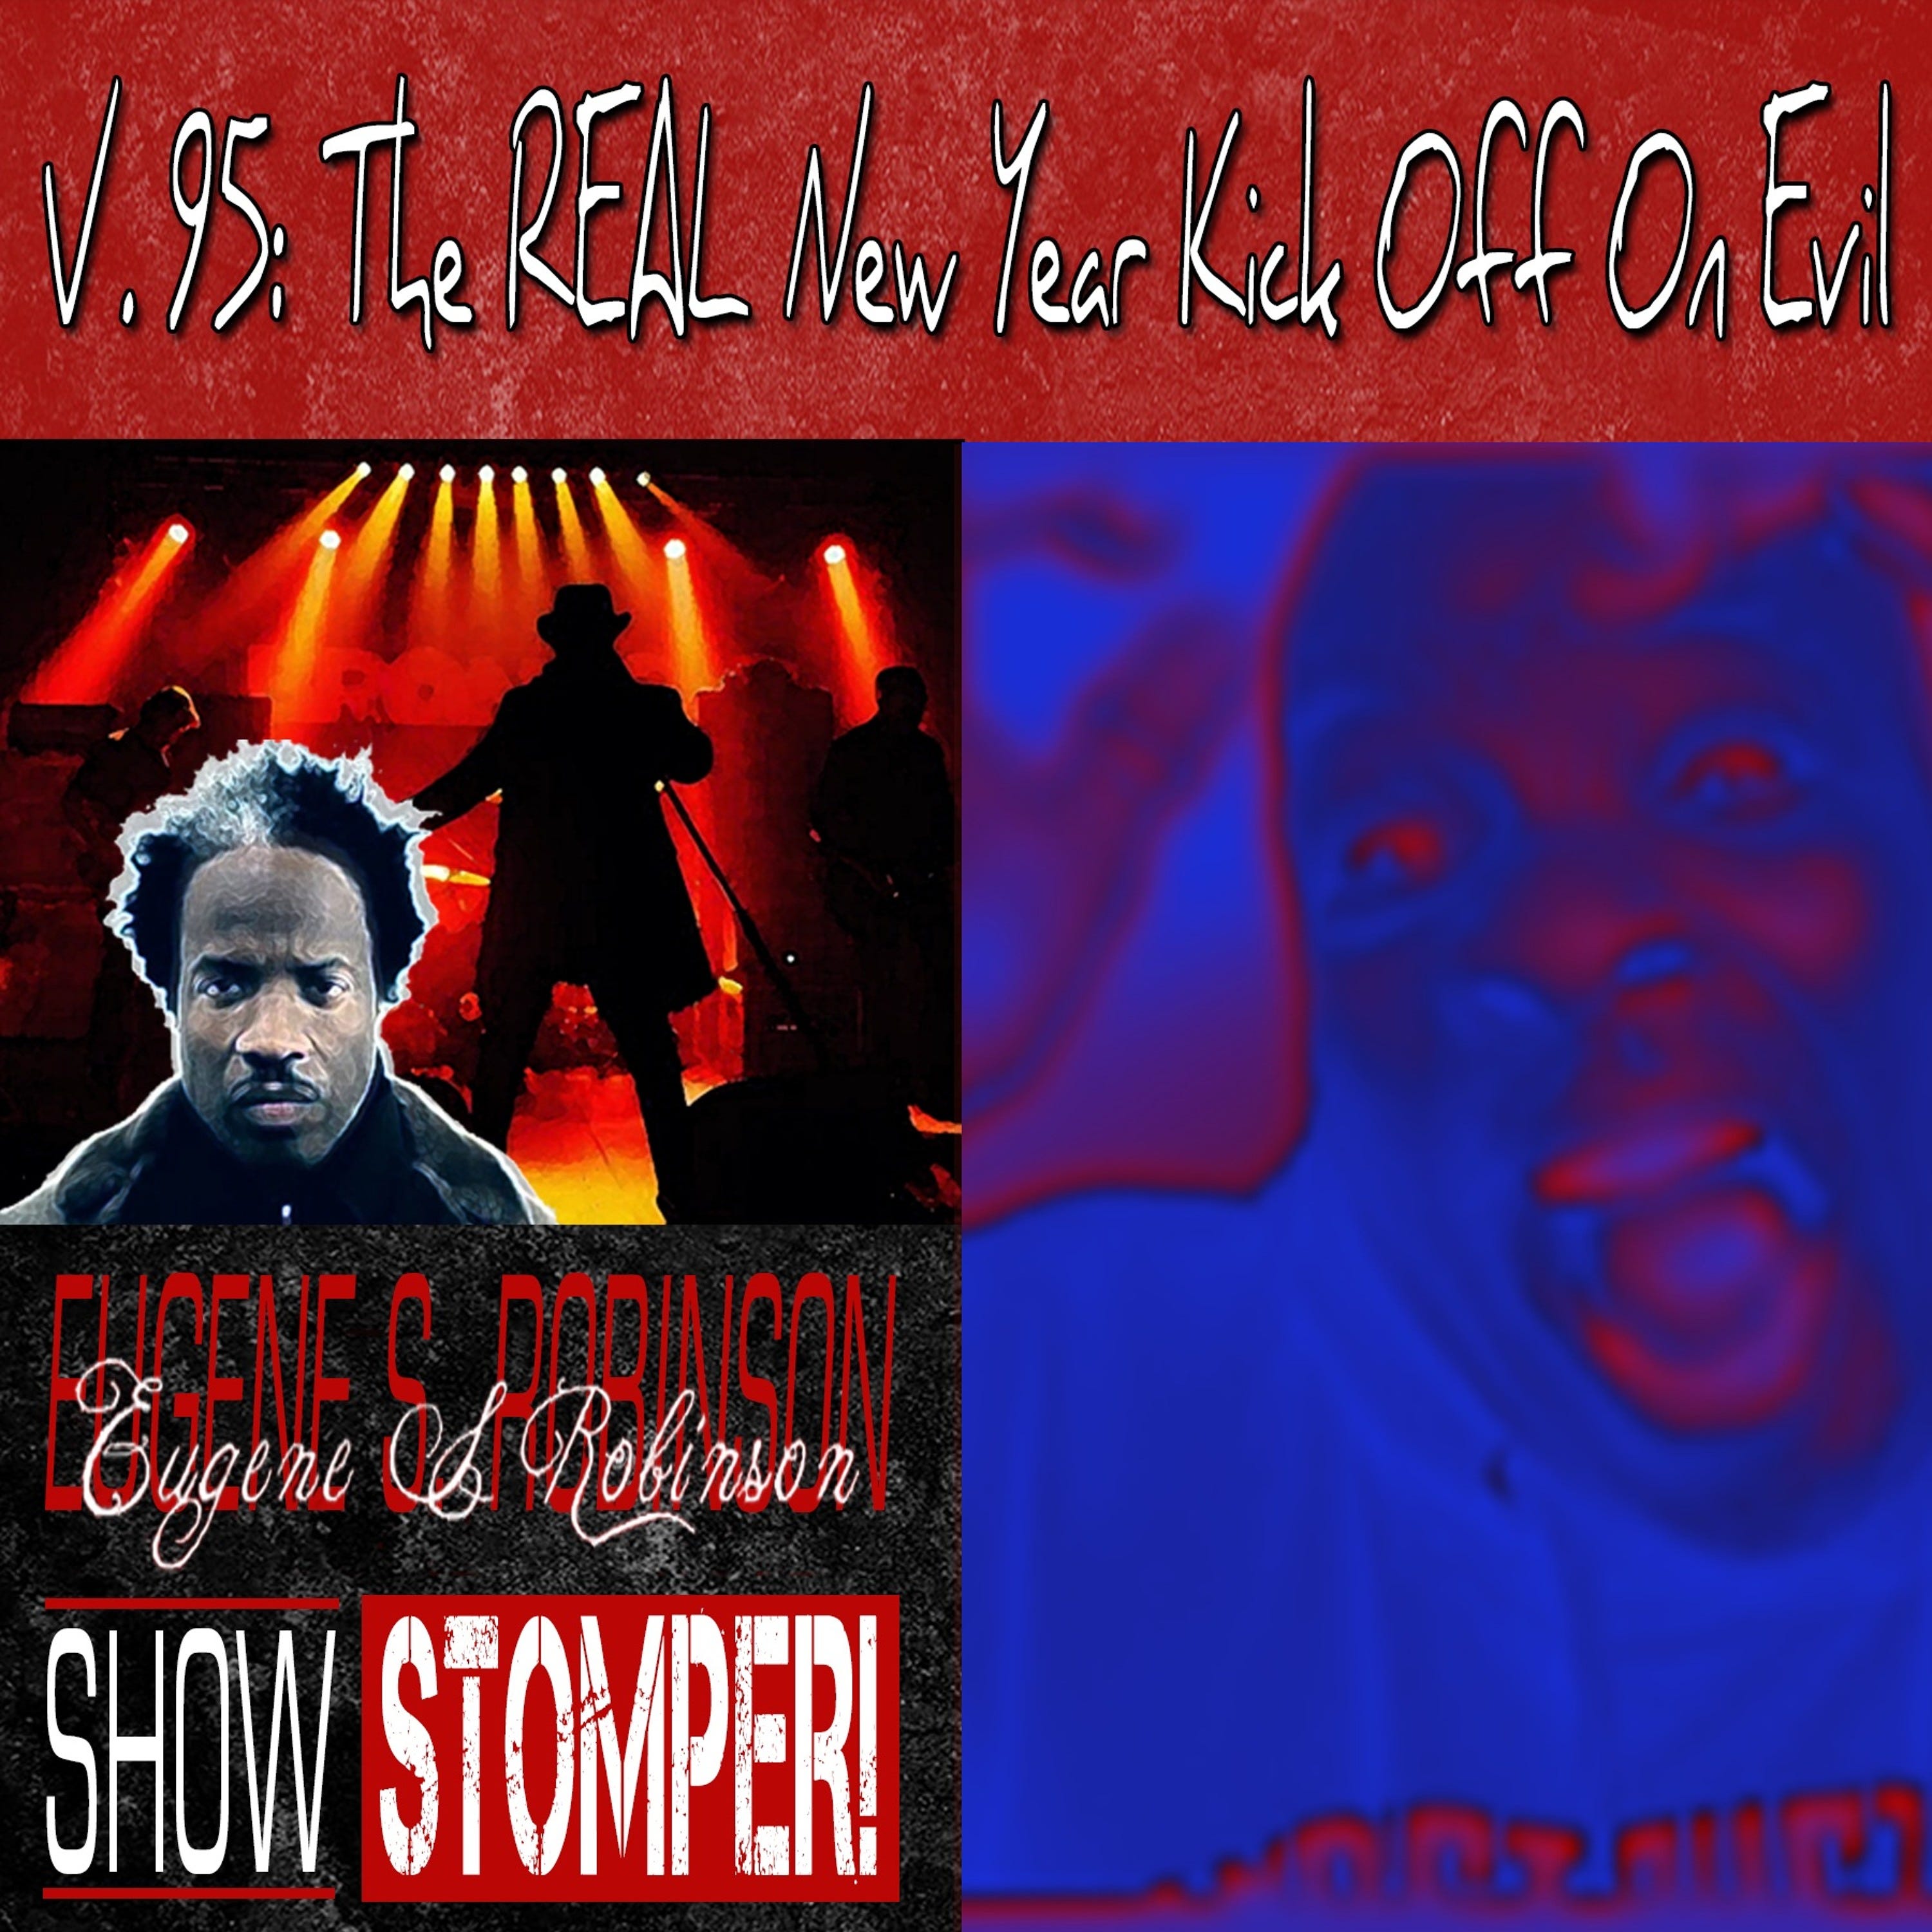 V.95 The New Year Kick Off On Evil + The Eugene S. Robinson Show Stomper!